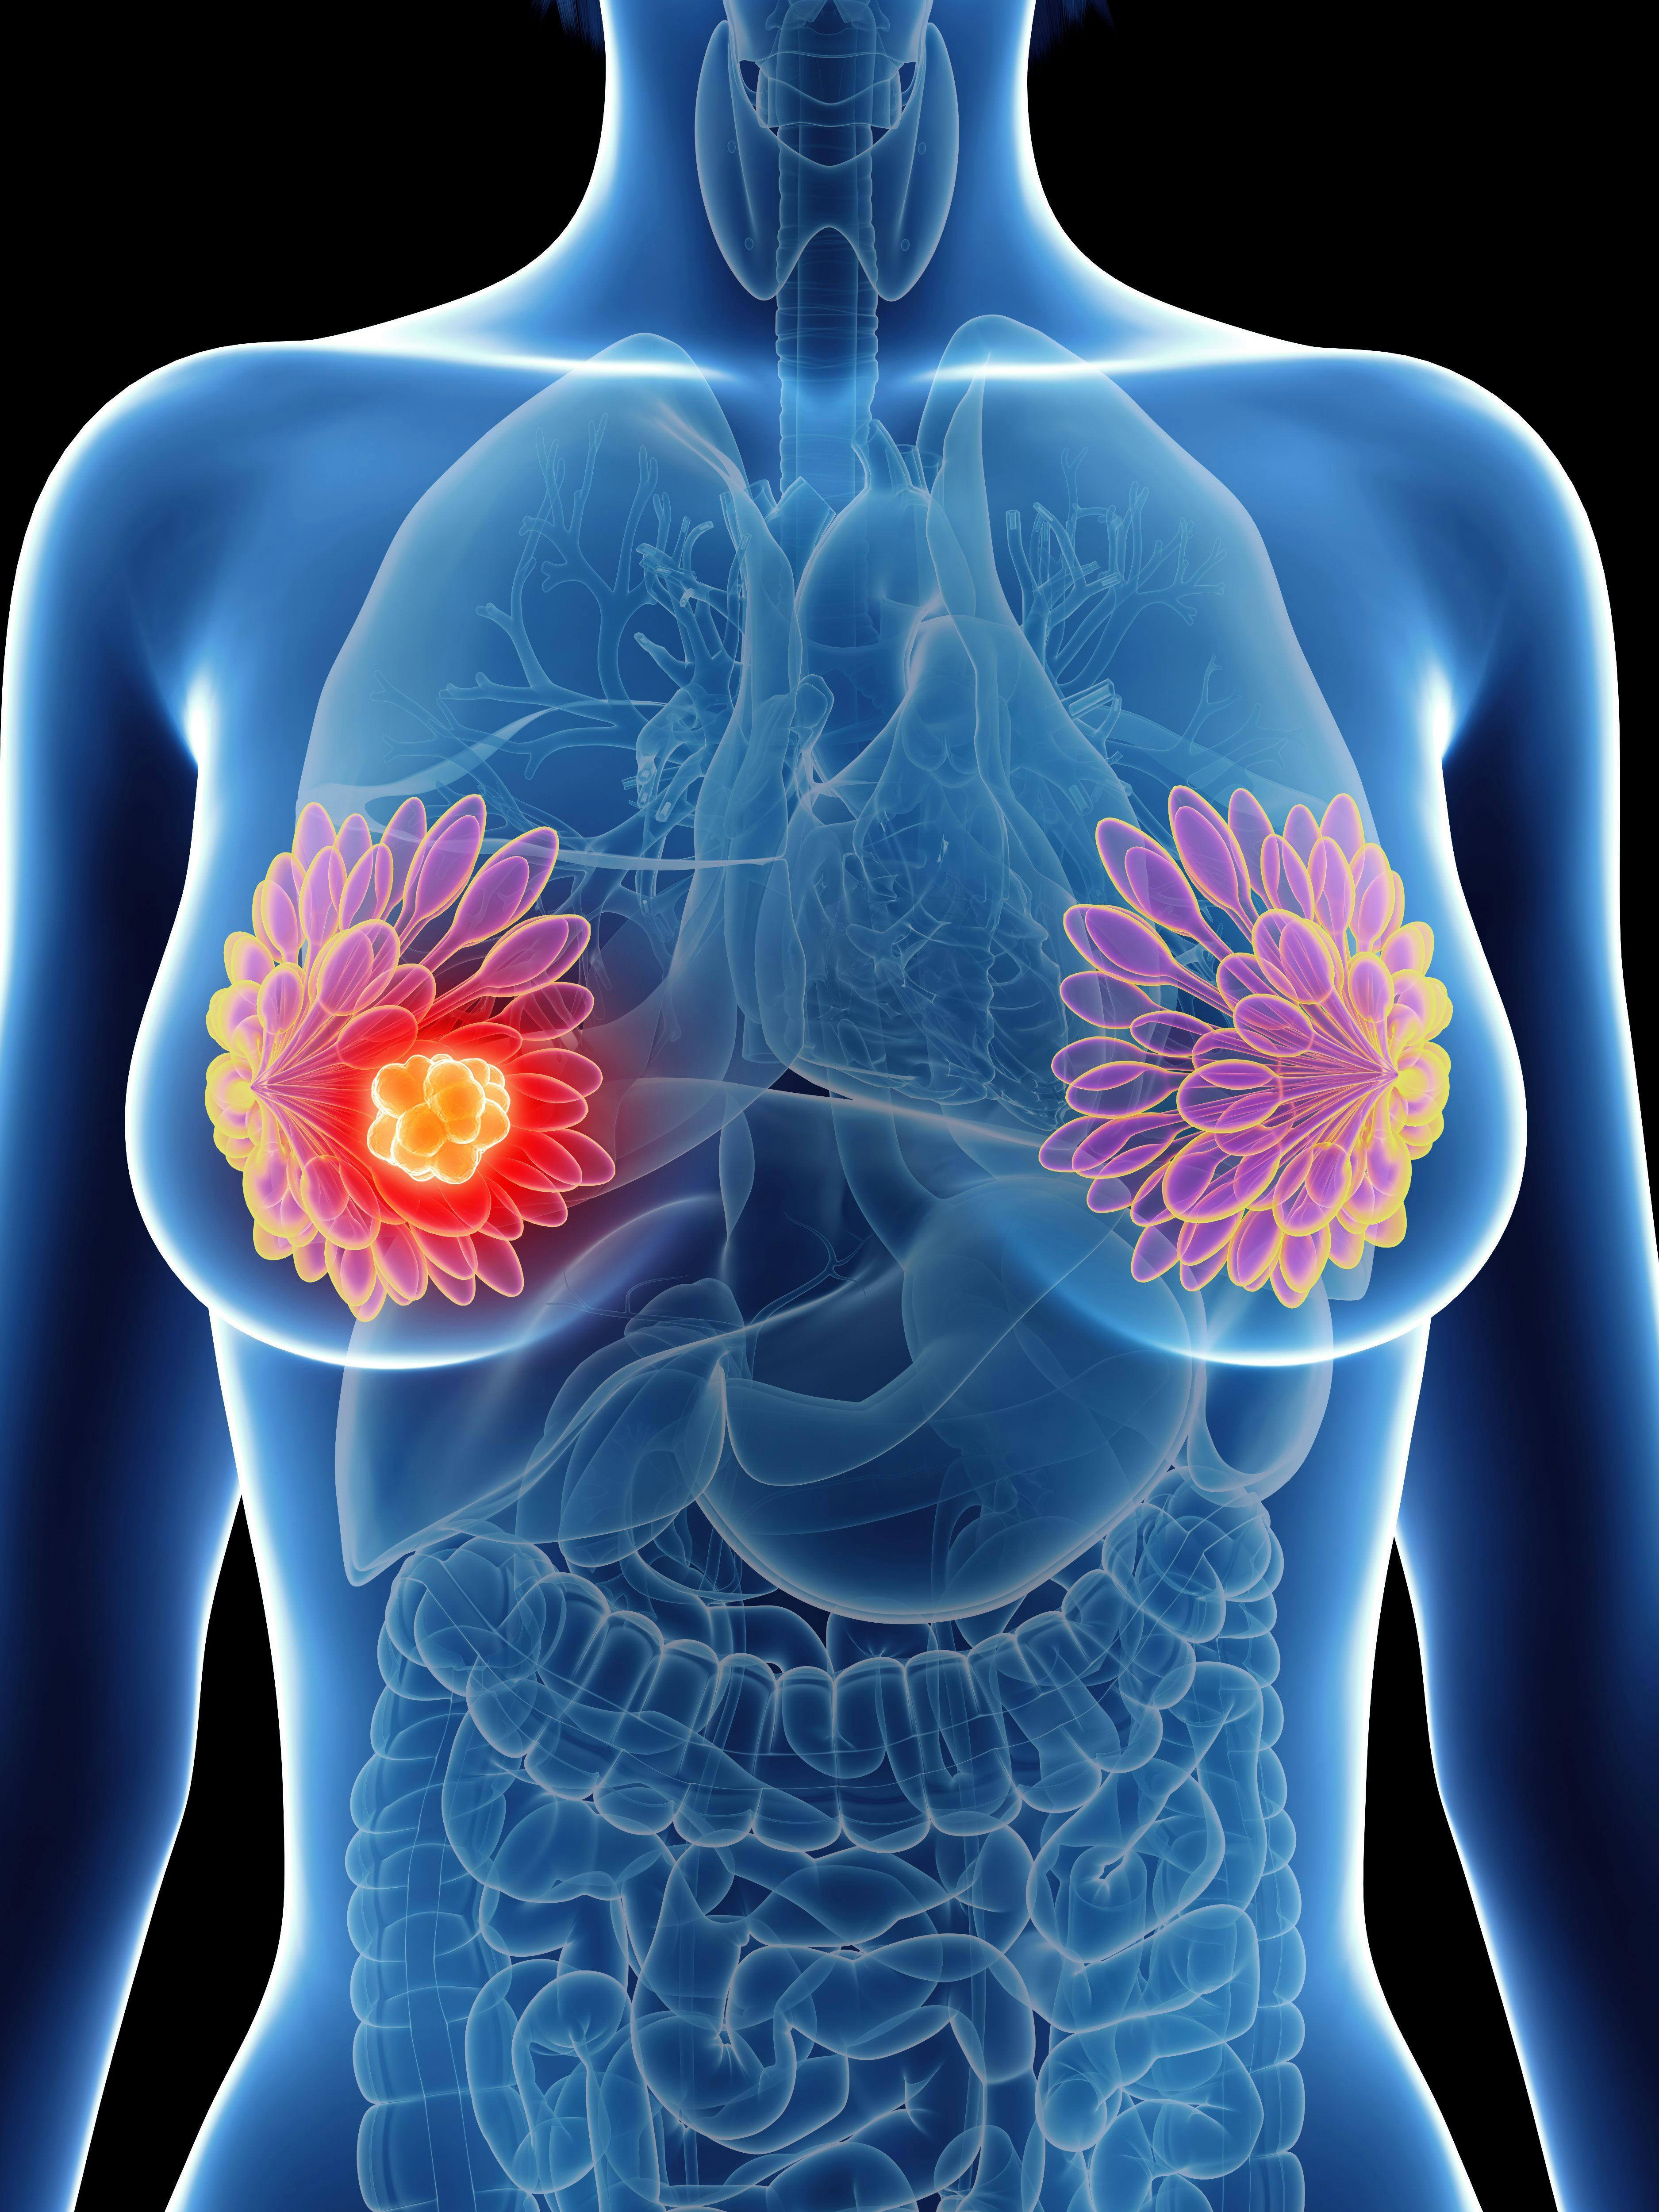 De-Escalation Trastuzumab/Pertuzumab ± Paclitaxel Yields Promising Responses in HER2+/HR– Early Breast Cancer